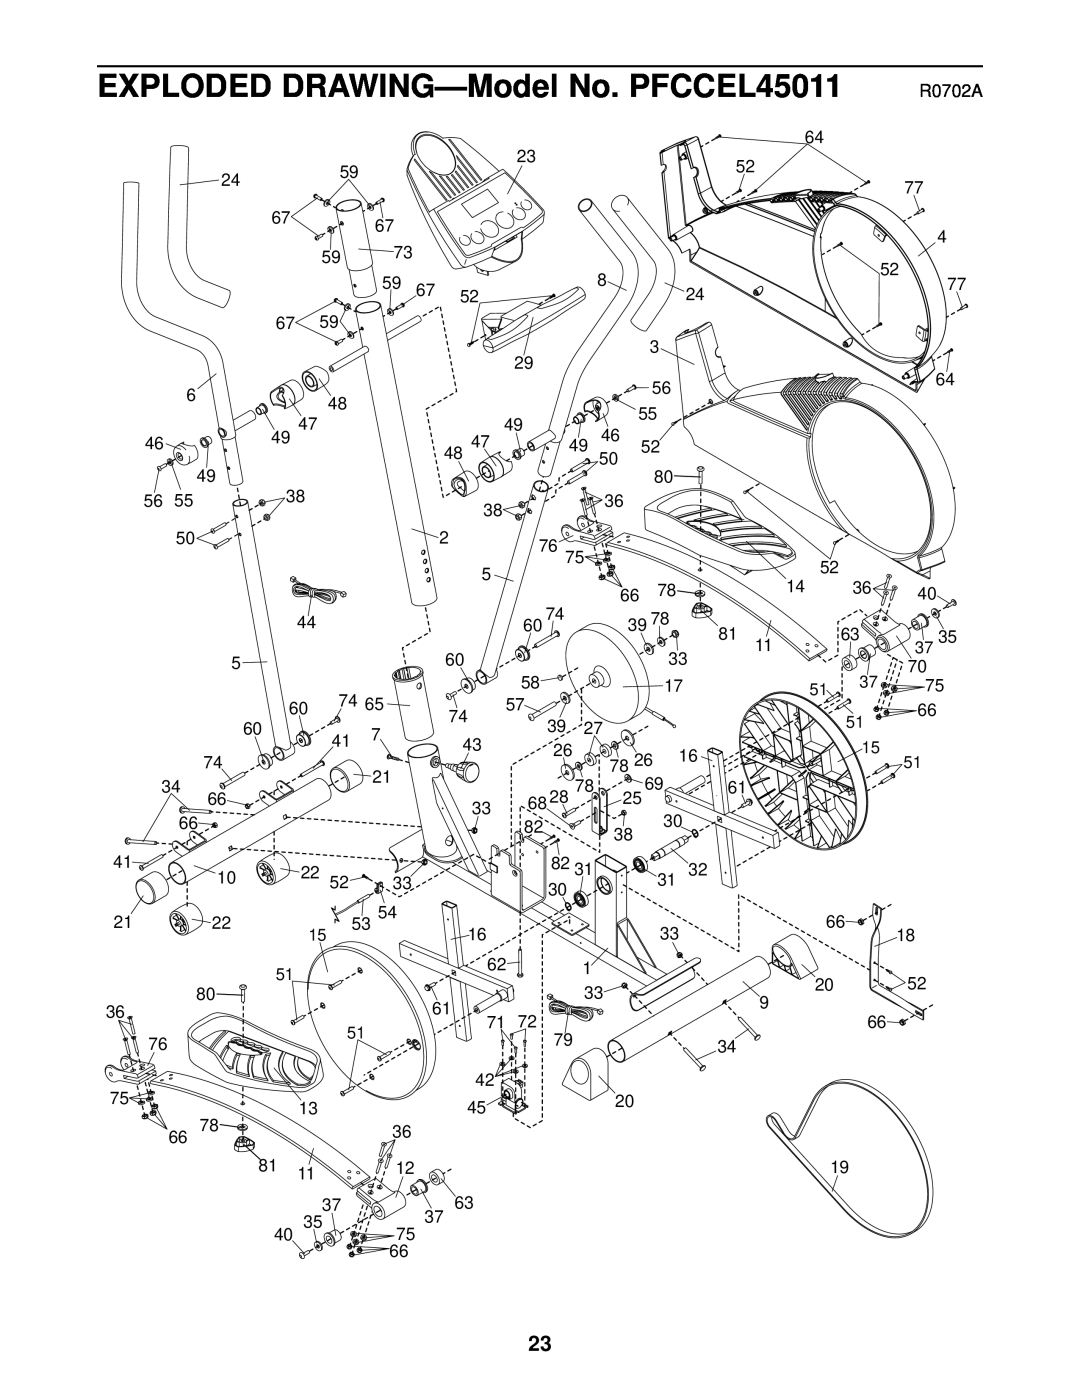 ProForm user manual EXPLODED DRAWING-Model No. PFCCEL45011, R0702A 